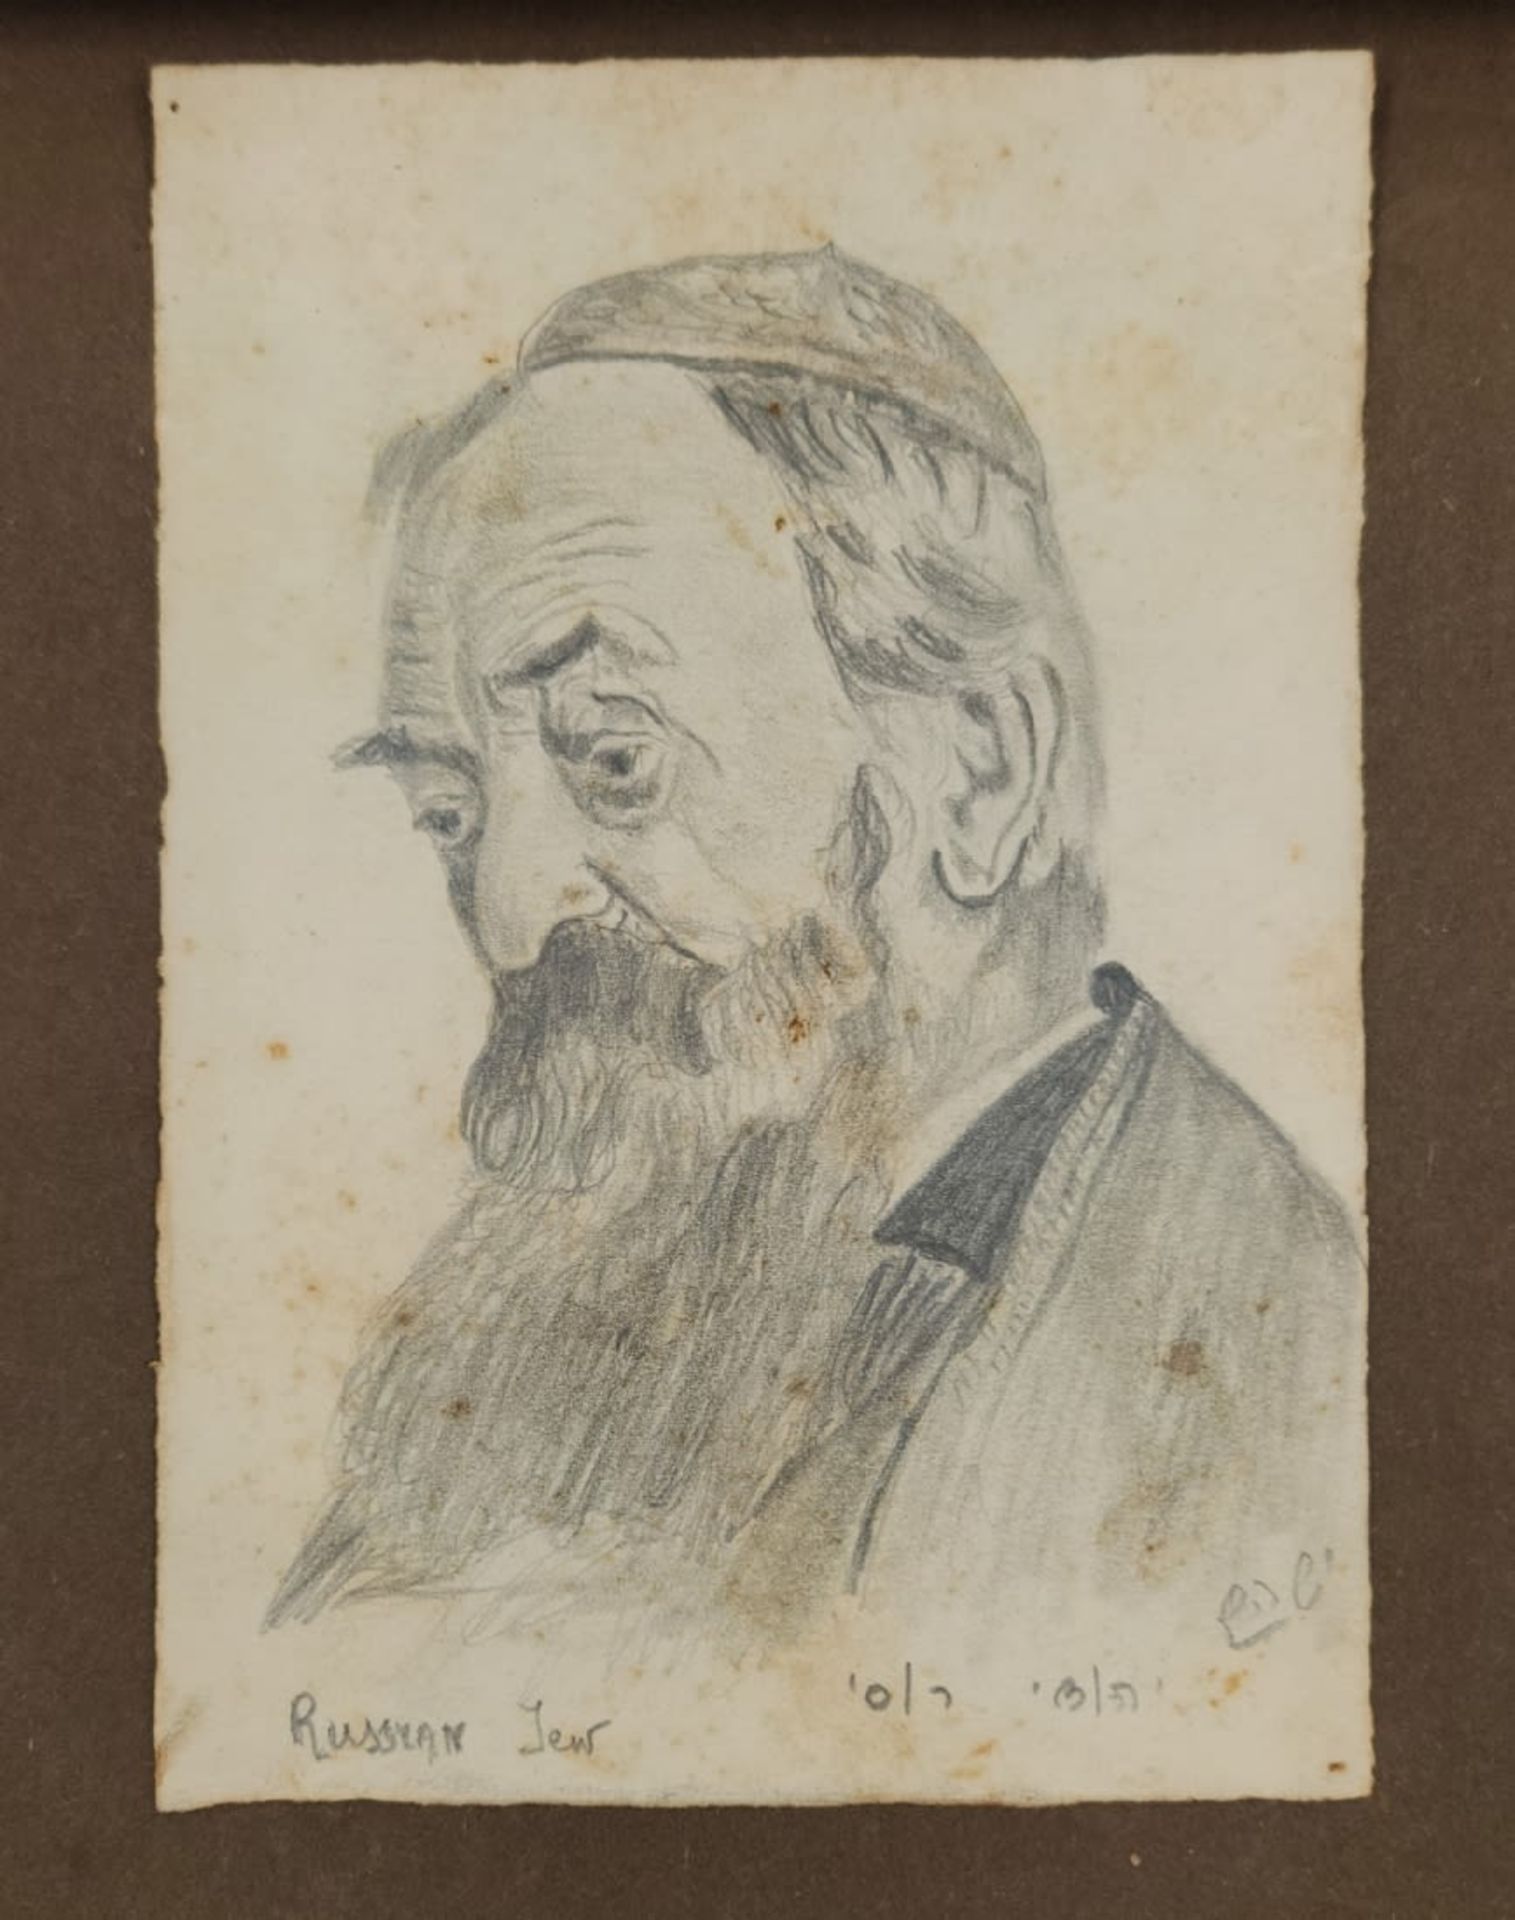 11 drawings of Jewish man, J. Shoham, pencil on paper, some stains, signed: J. Shoham pasted in an - Image 10 of 12